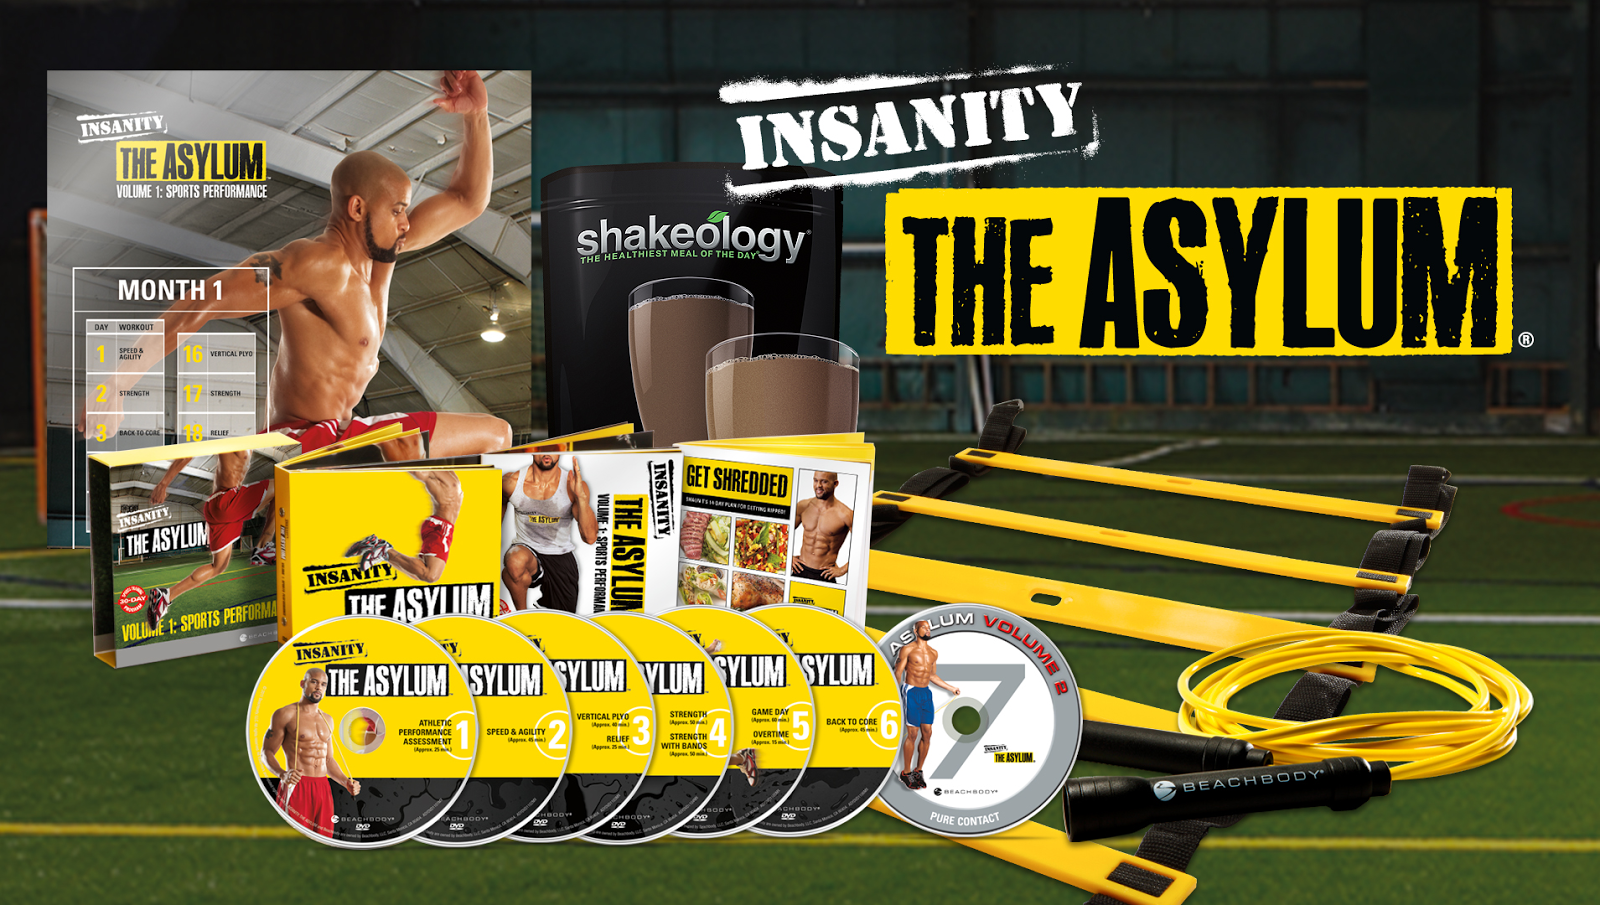 Best The asylum workout download for Build Muscle